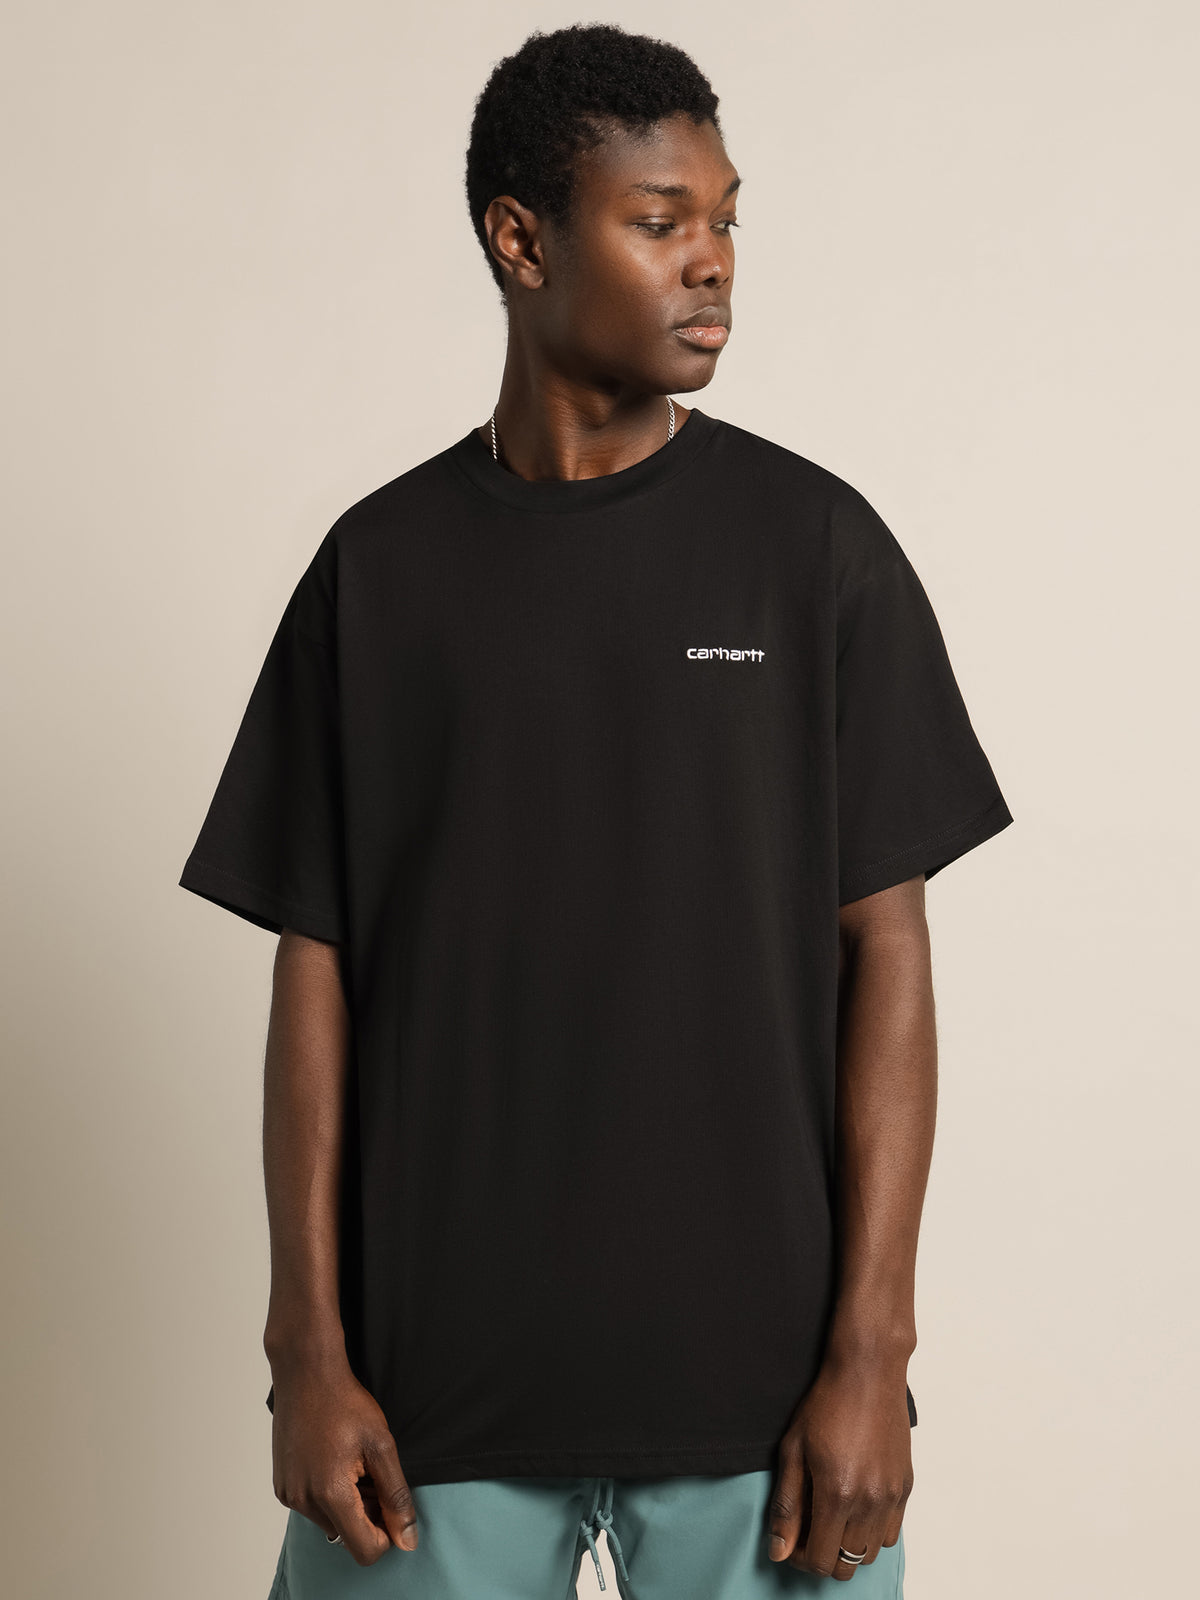 Short Sleeve Embroidered Script T-Shirt in Black